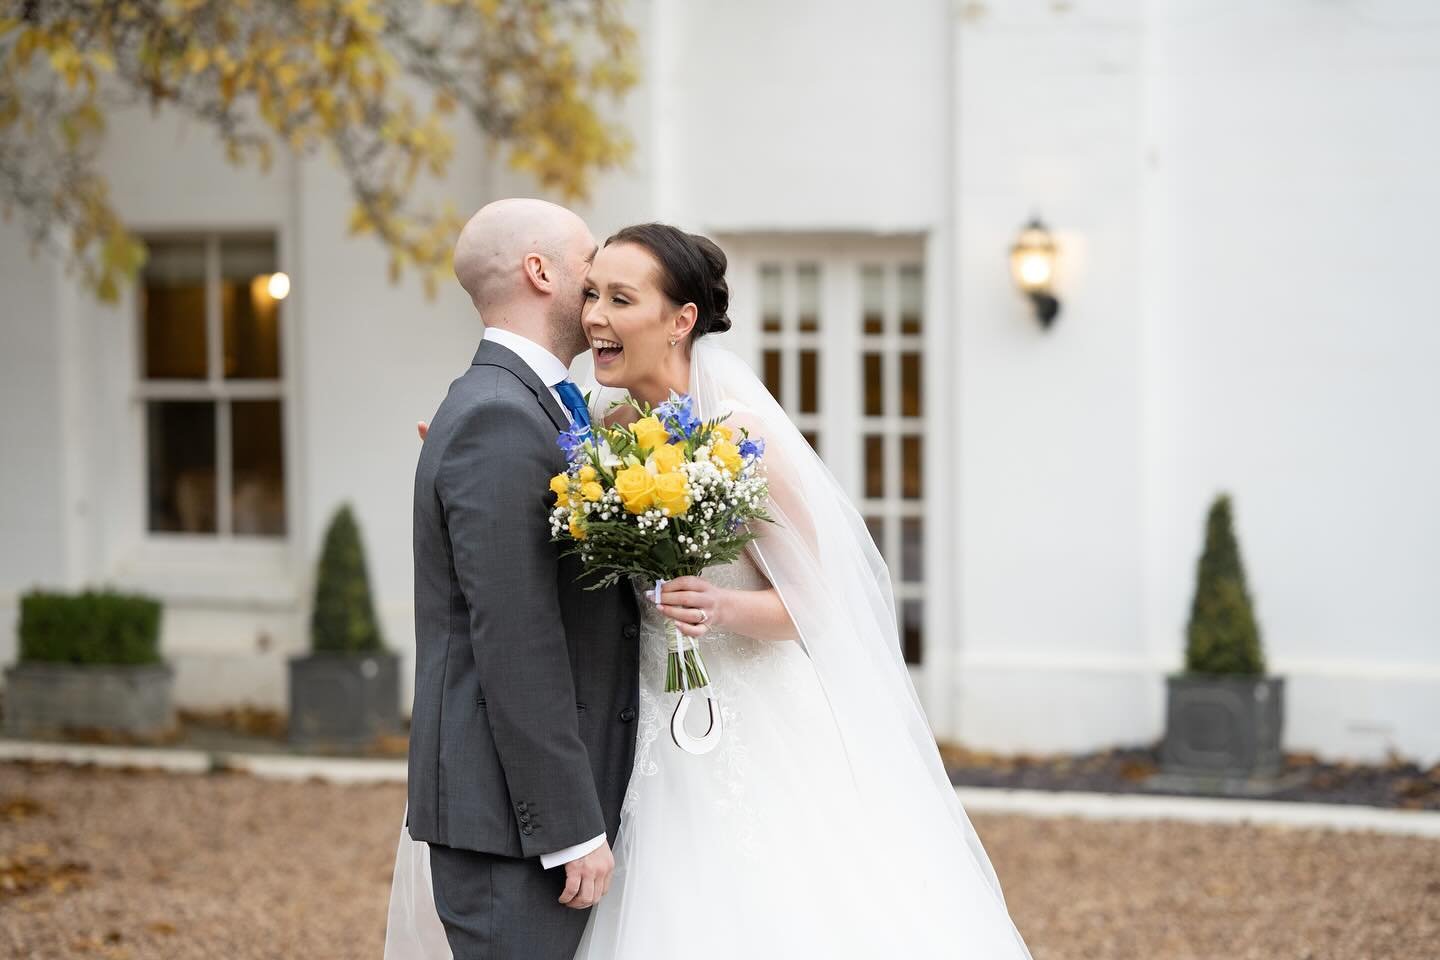 The @warwick_house wedding of Tracey &amp; Paul is now on my blog for you to share in their wonderful day (click on link in bio)
It was such a joy to get to know Tracey &amp; Paul from our initial meeting, engagement shoot and planning meeting, so by